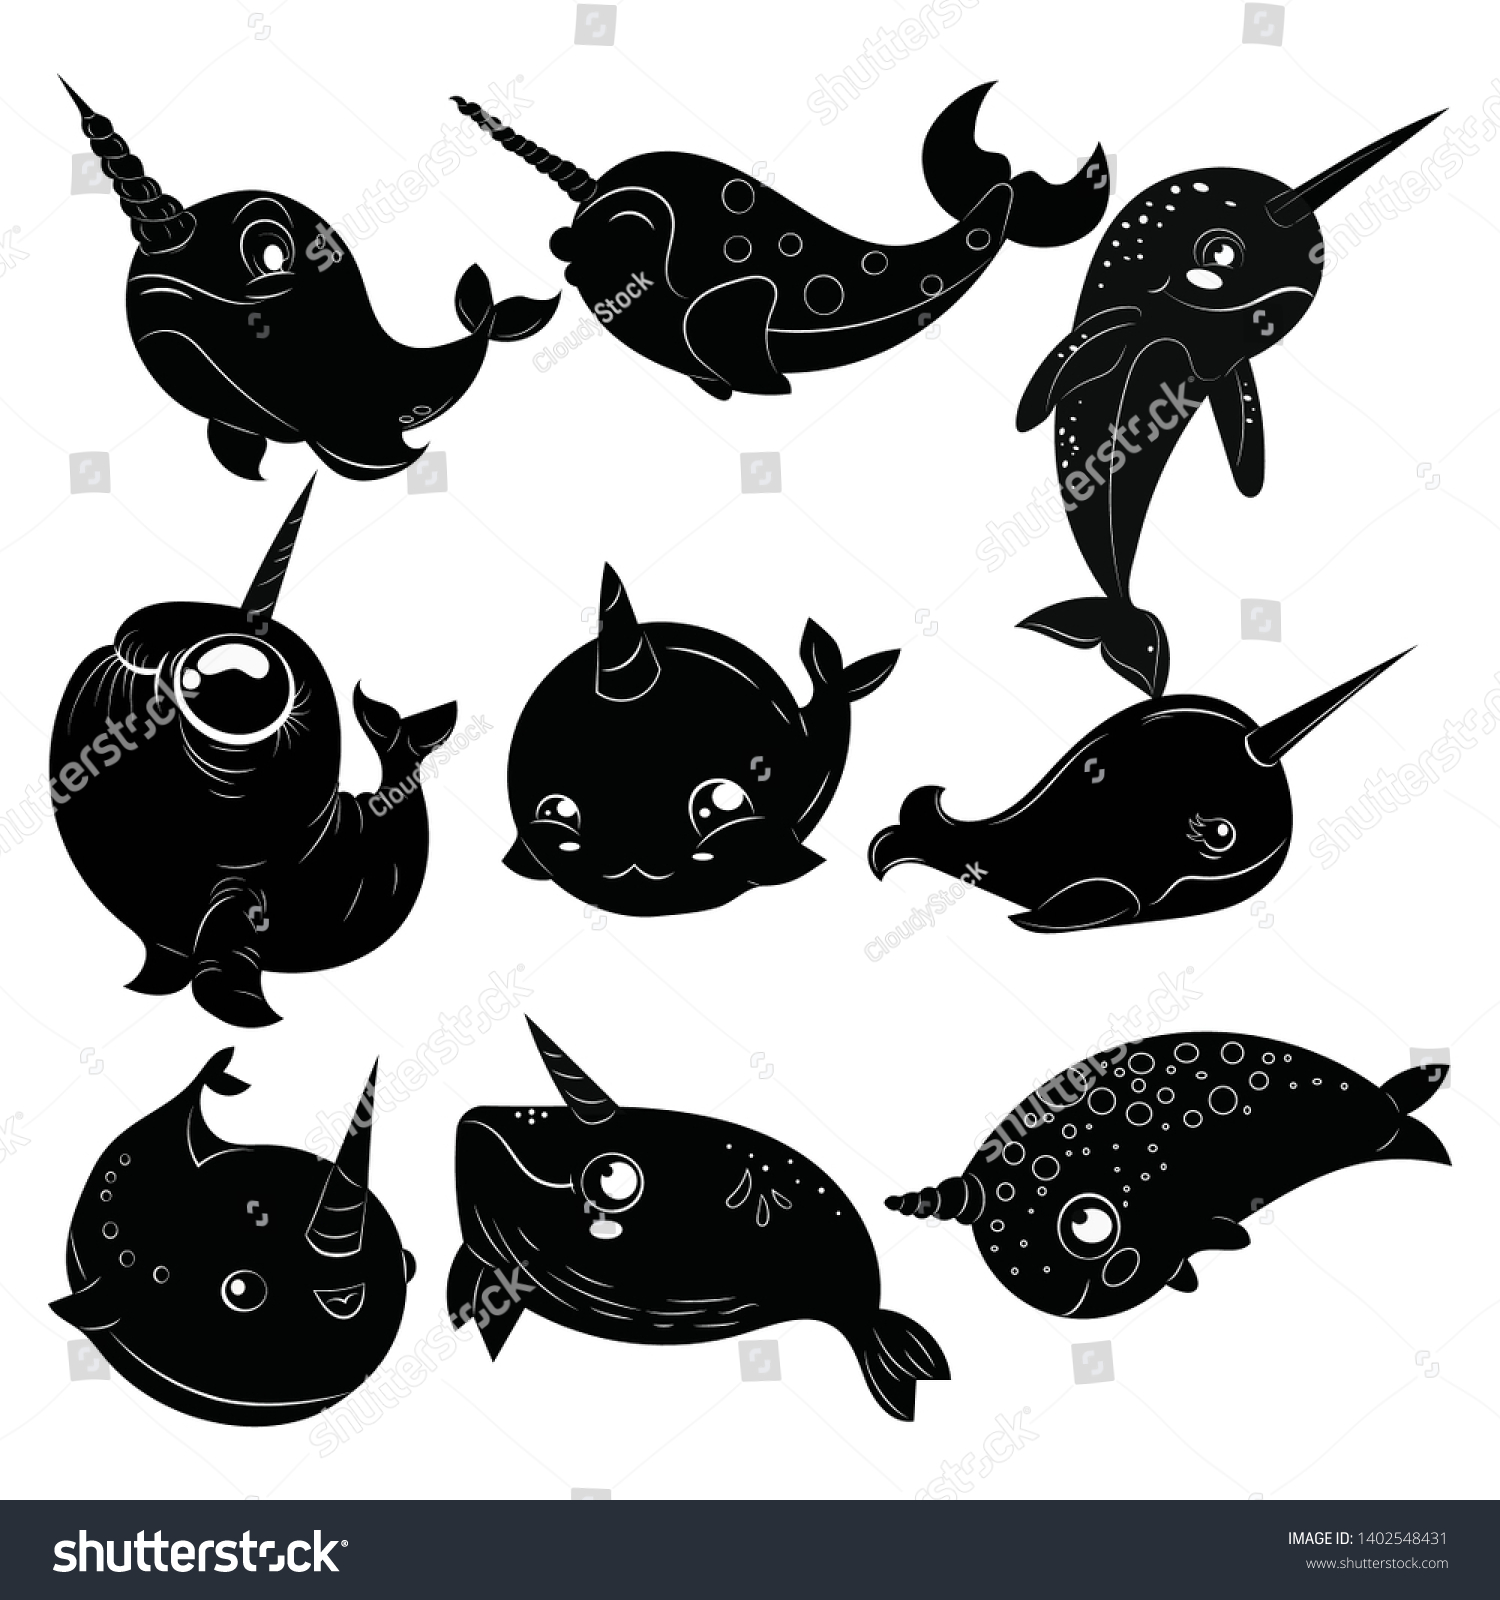 Set Cartoon Narwhals Collection Black White Stock Vector Royalty Free Shutterstock